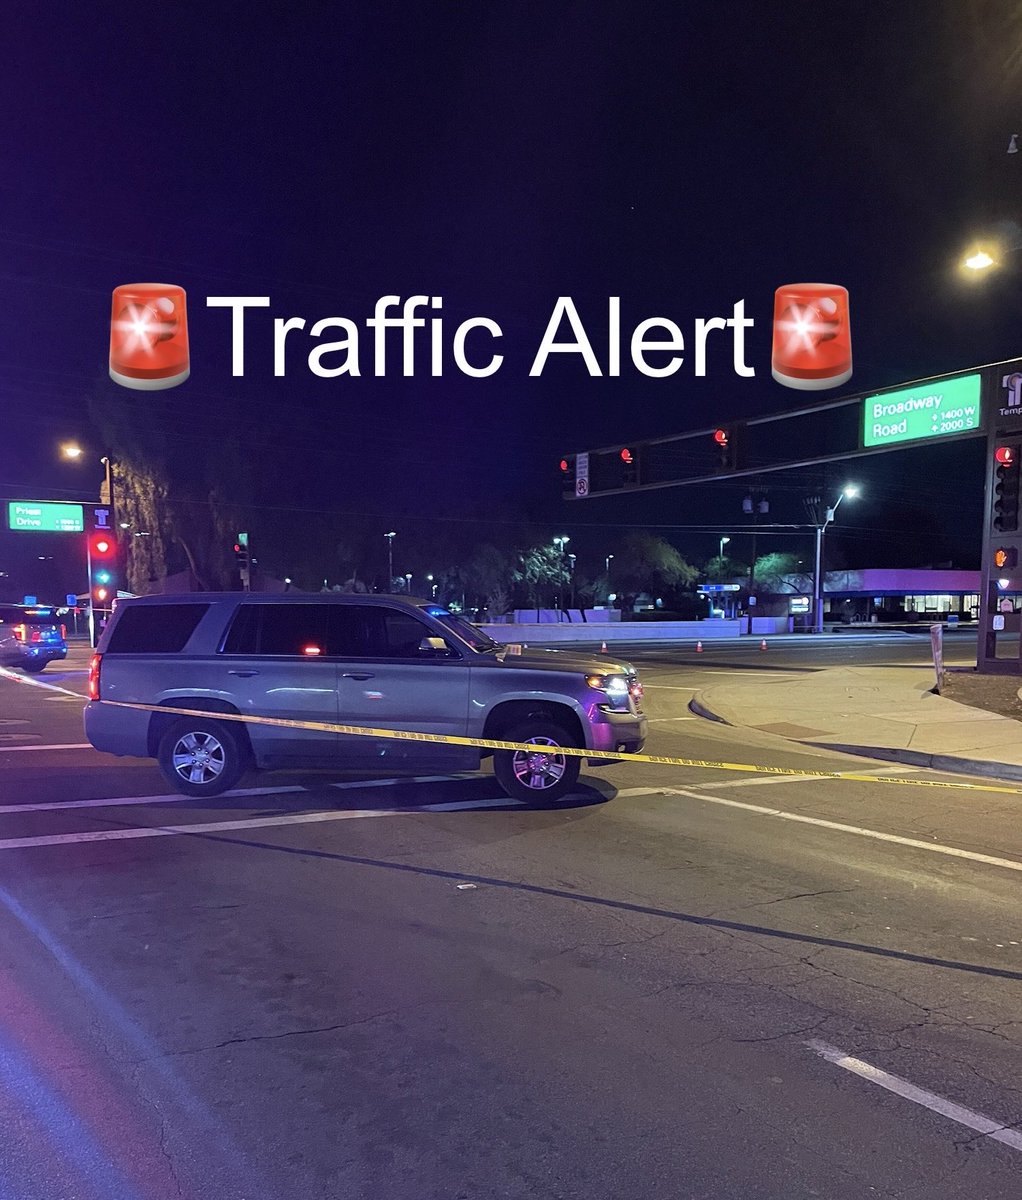 Tempe PD is on scene for a fatal collision involving a pedestrian in the area of Broadway Rd and Priest Dr. Please avoid the area as there are heavy traffic restrictions in place.